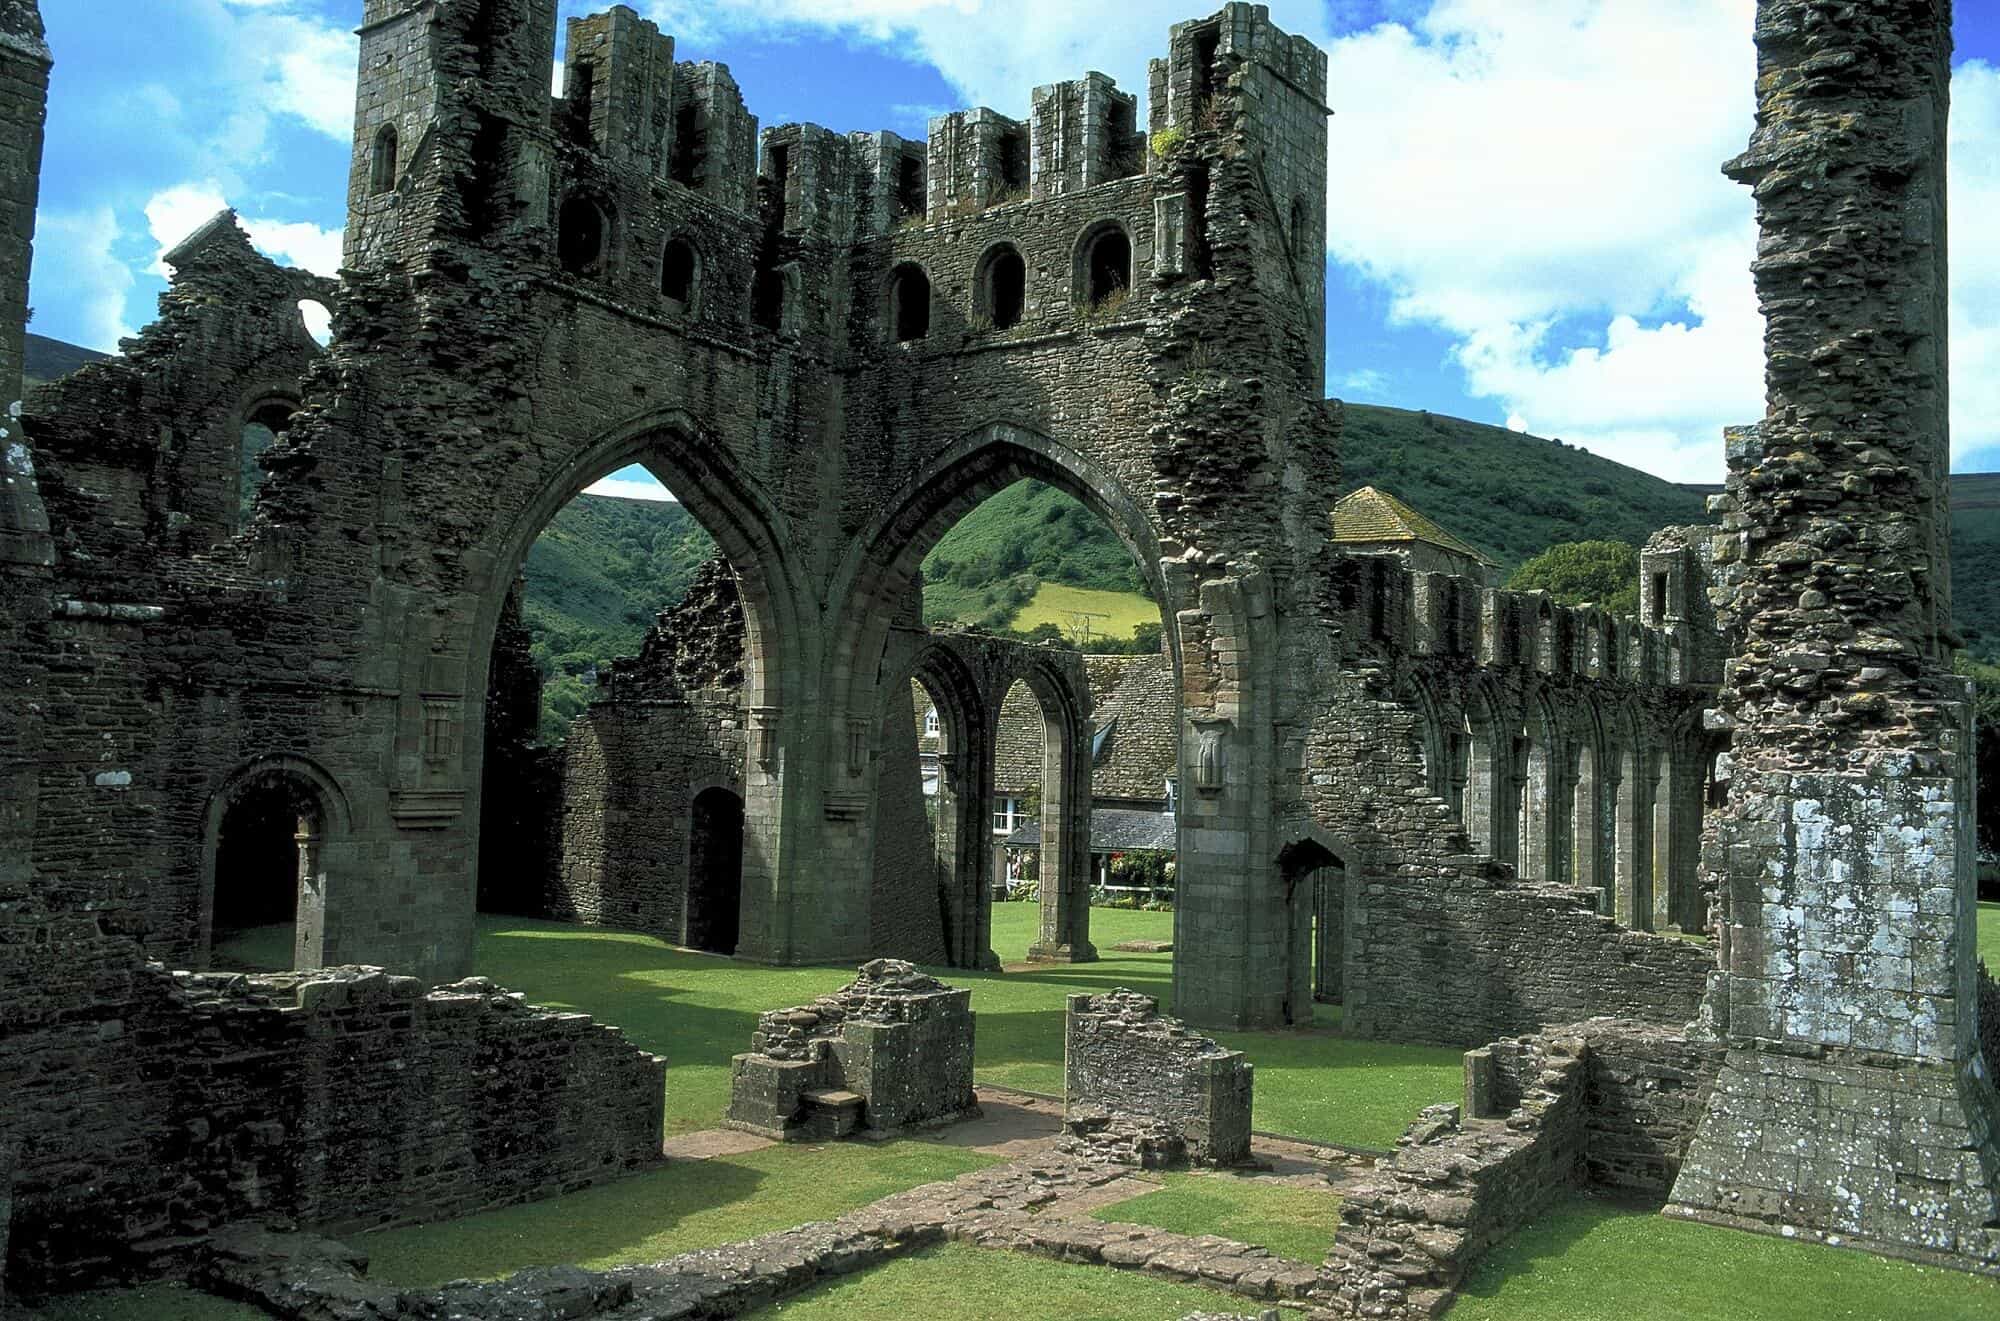 Llanthony Priory on the Offa's Dyke Path